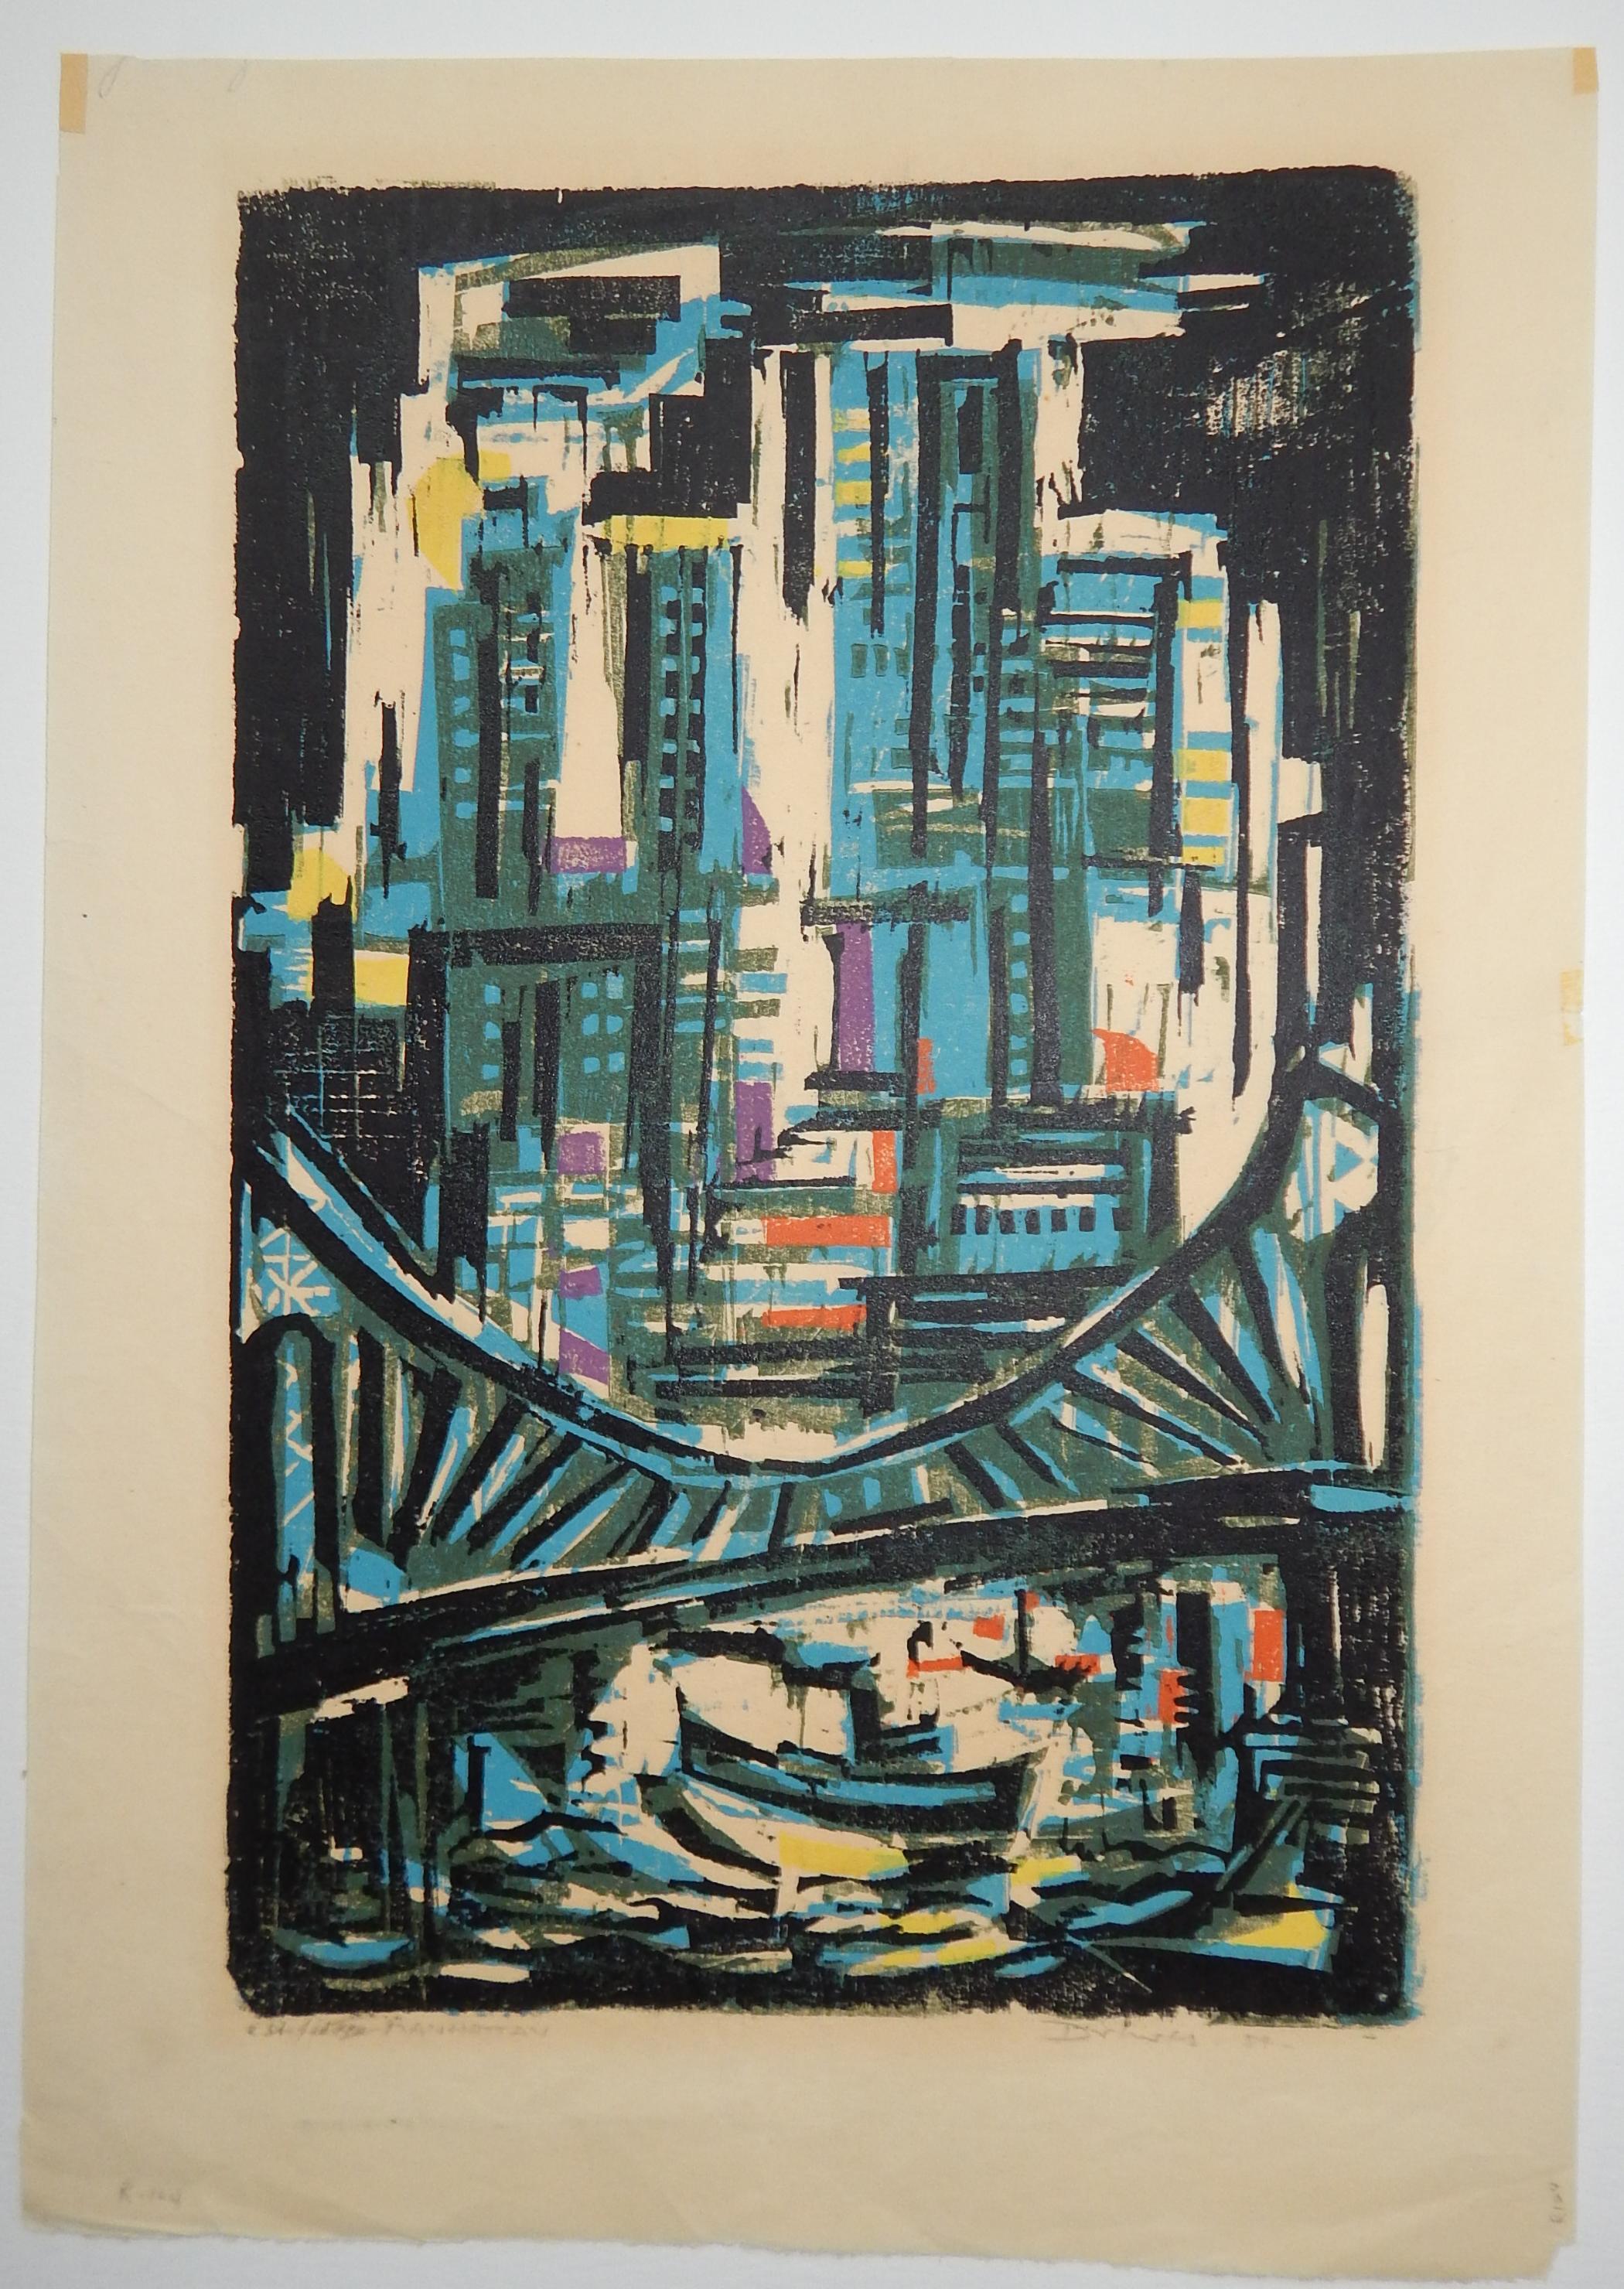 Original color woodblock print by Werner Drewes.
In excellent condition. Unframed. 
Image measures 18 x 11 ½ inches. 
Pencil signed and dated. Numbered 2 St/ed XXX
Rose catalog #164

Werner Drewes. (1899-1985)
 Werner Drewes, painter,